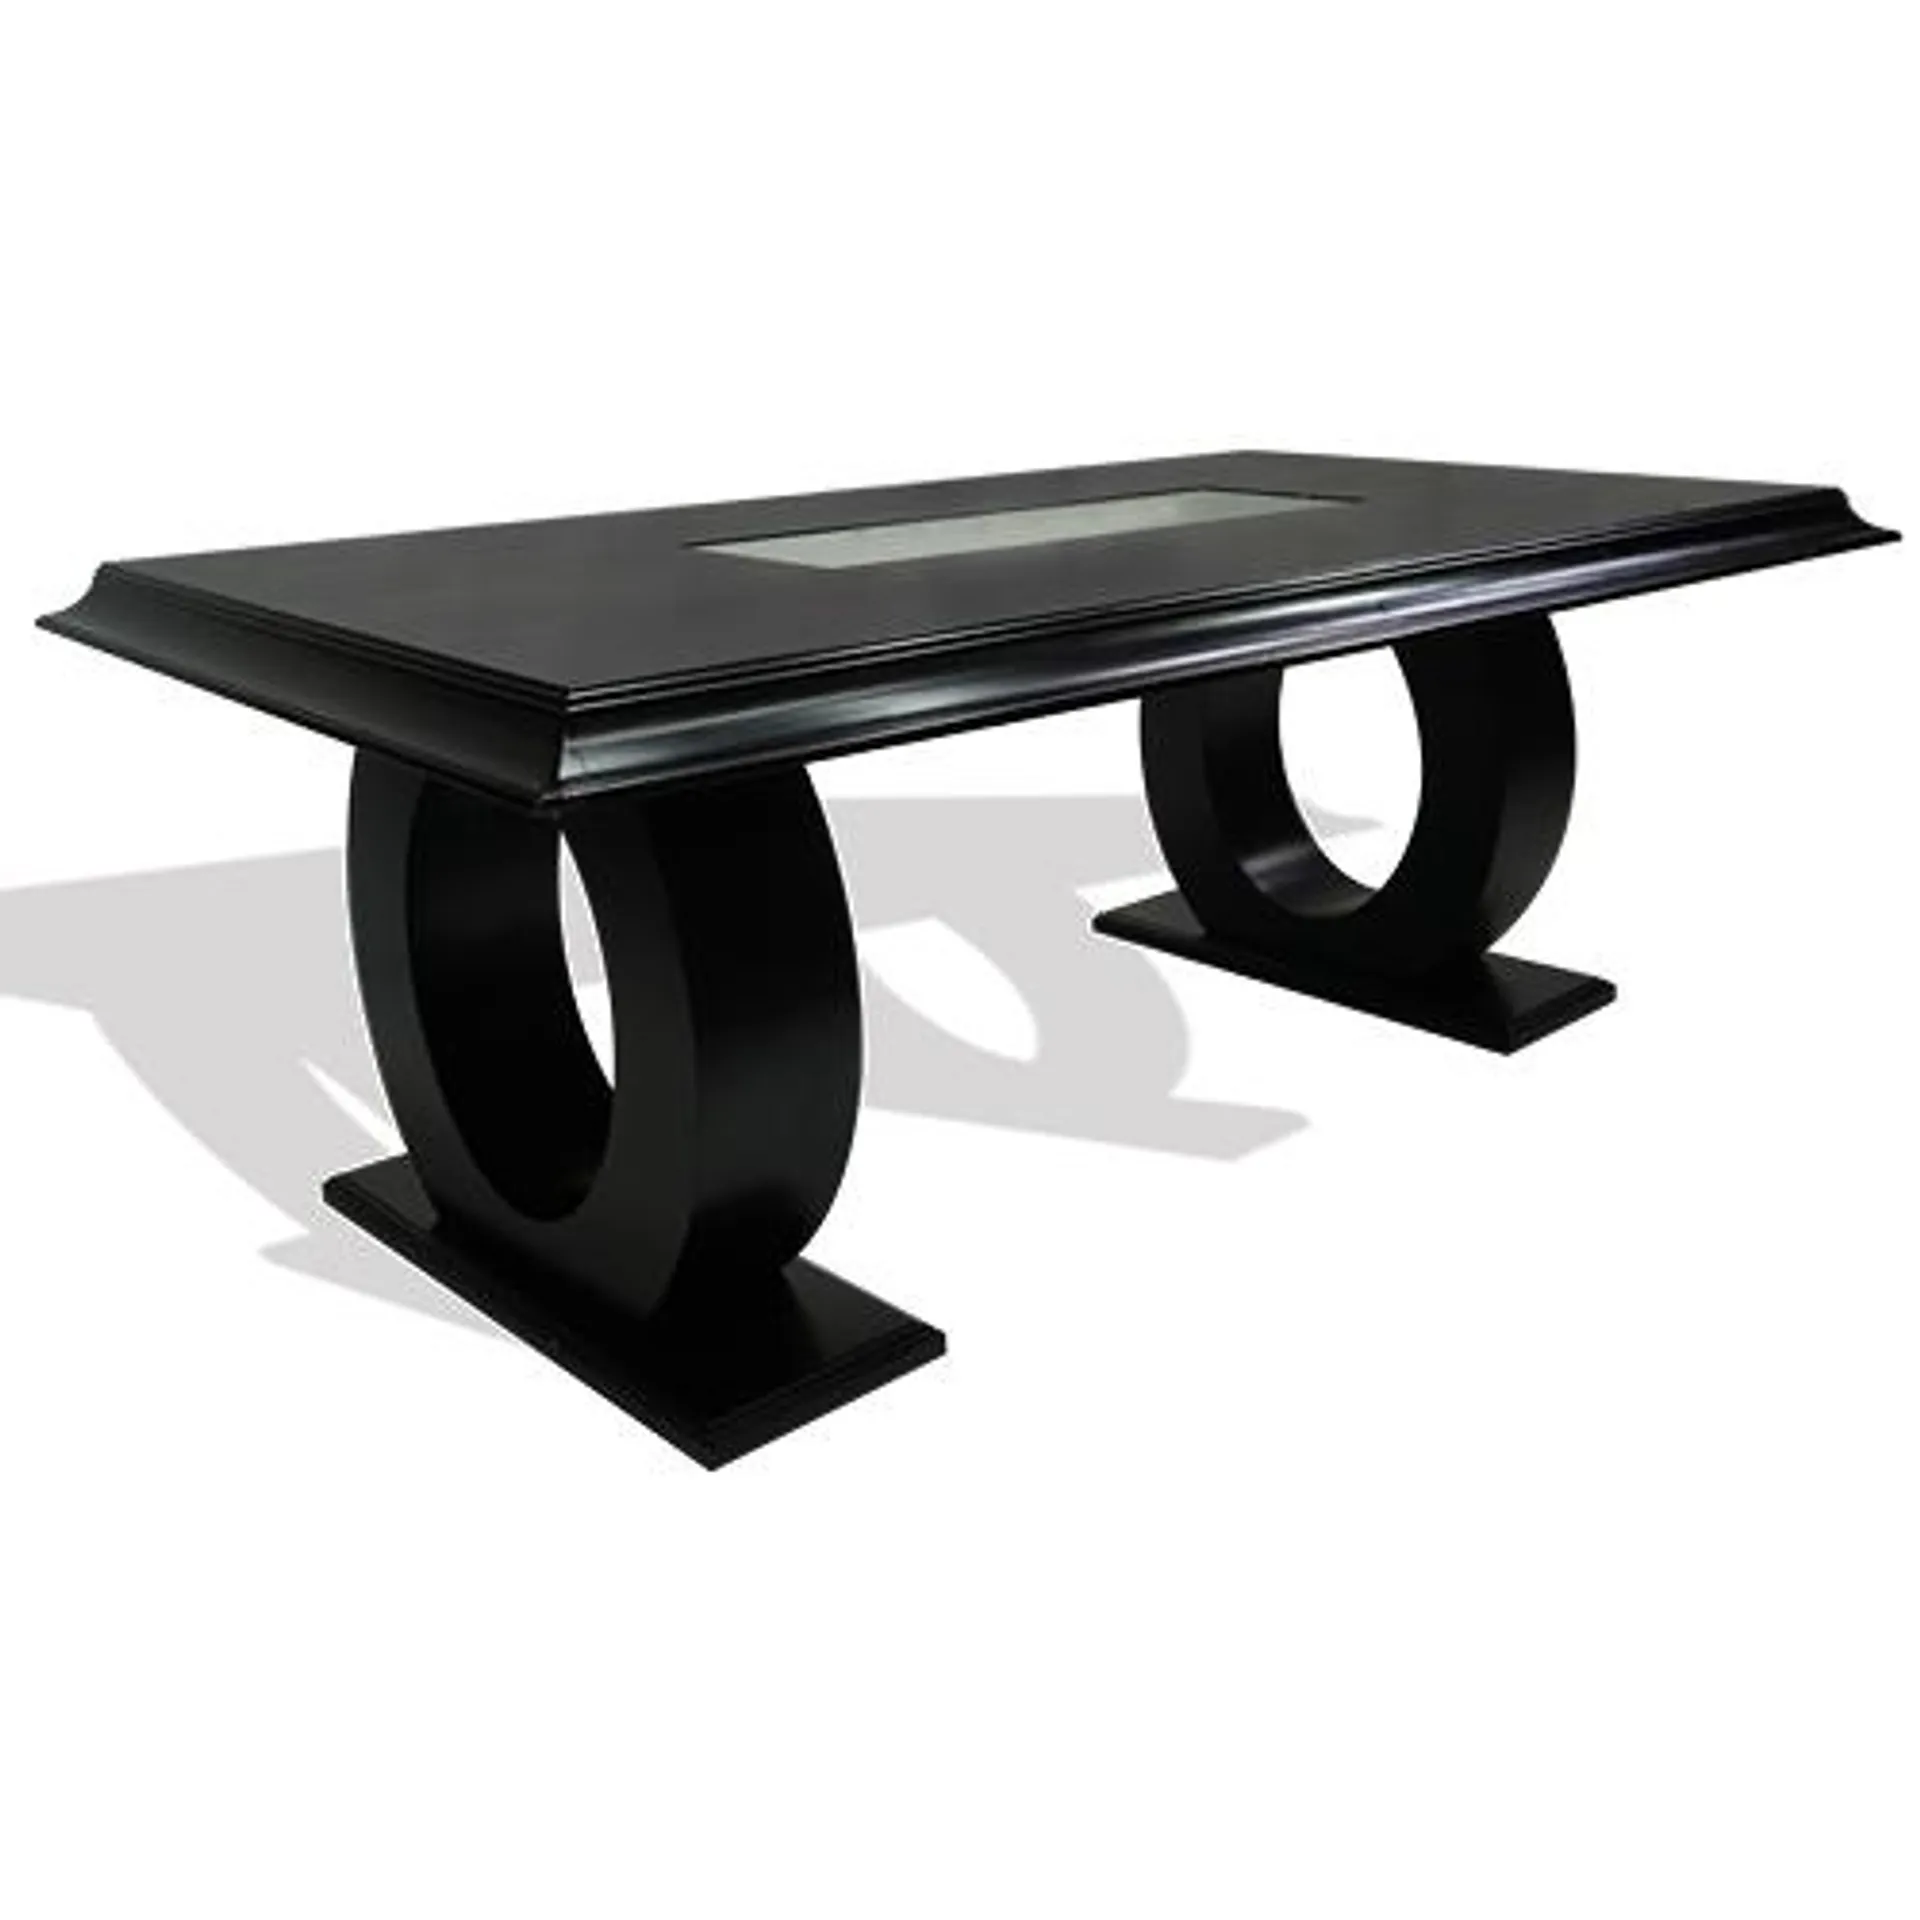 Avalon Dining Table 6 Seater